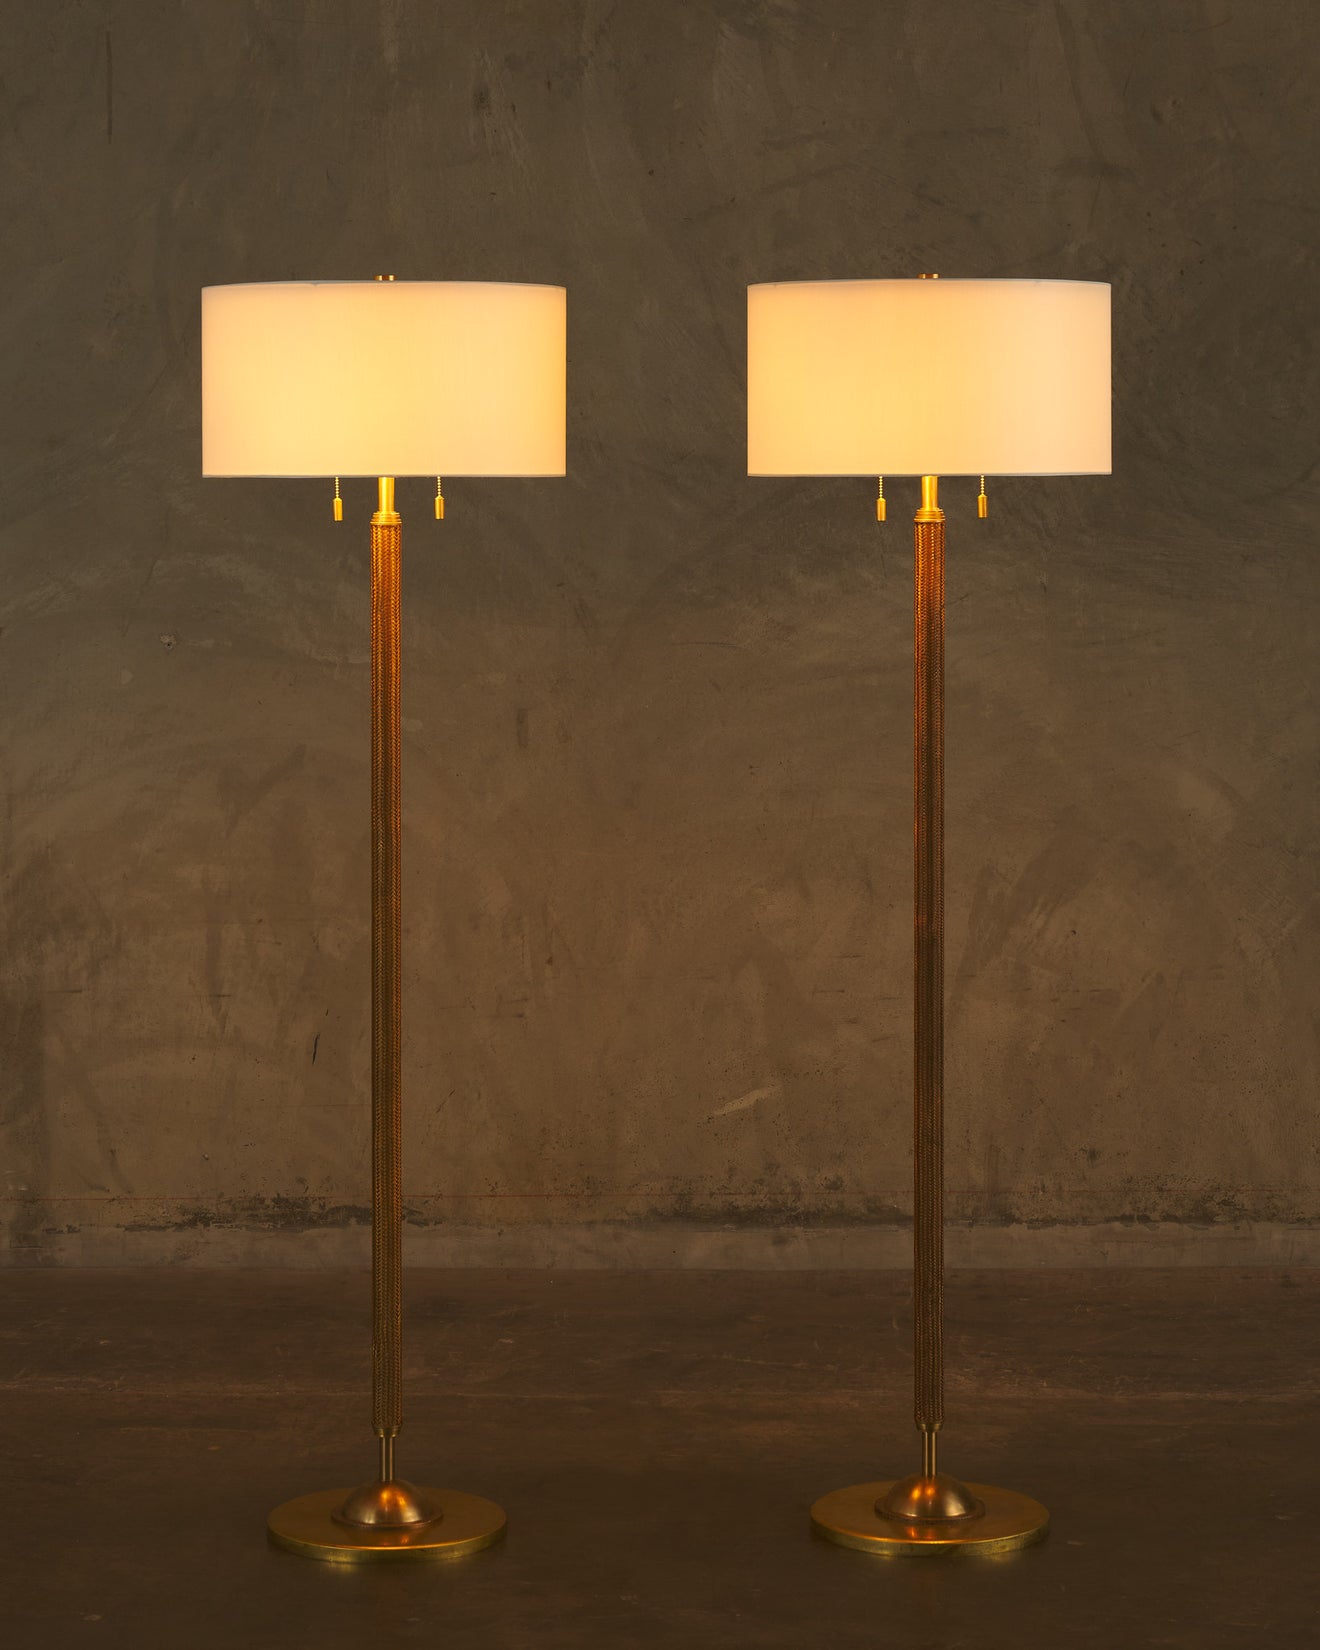 PAIR OF SNAKE SKIN STANDING LAMPS BY GIANNI VALLINO